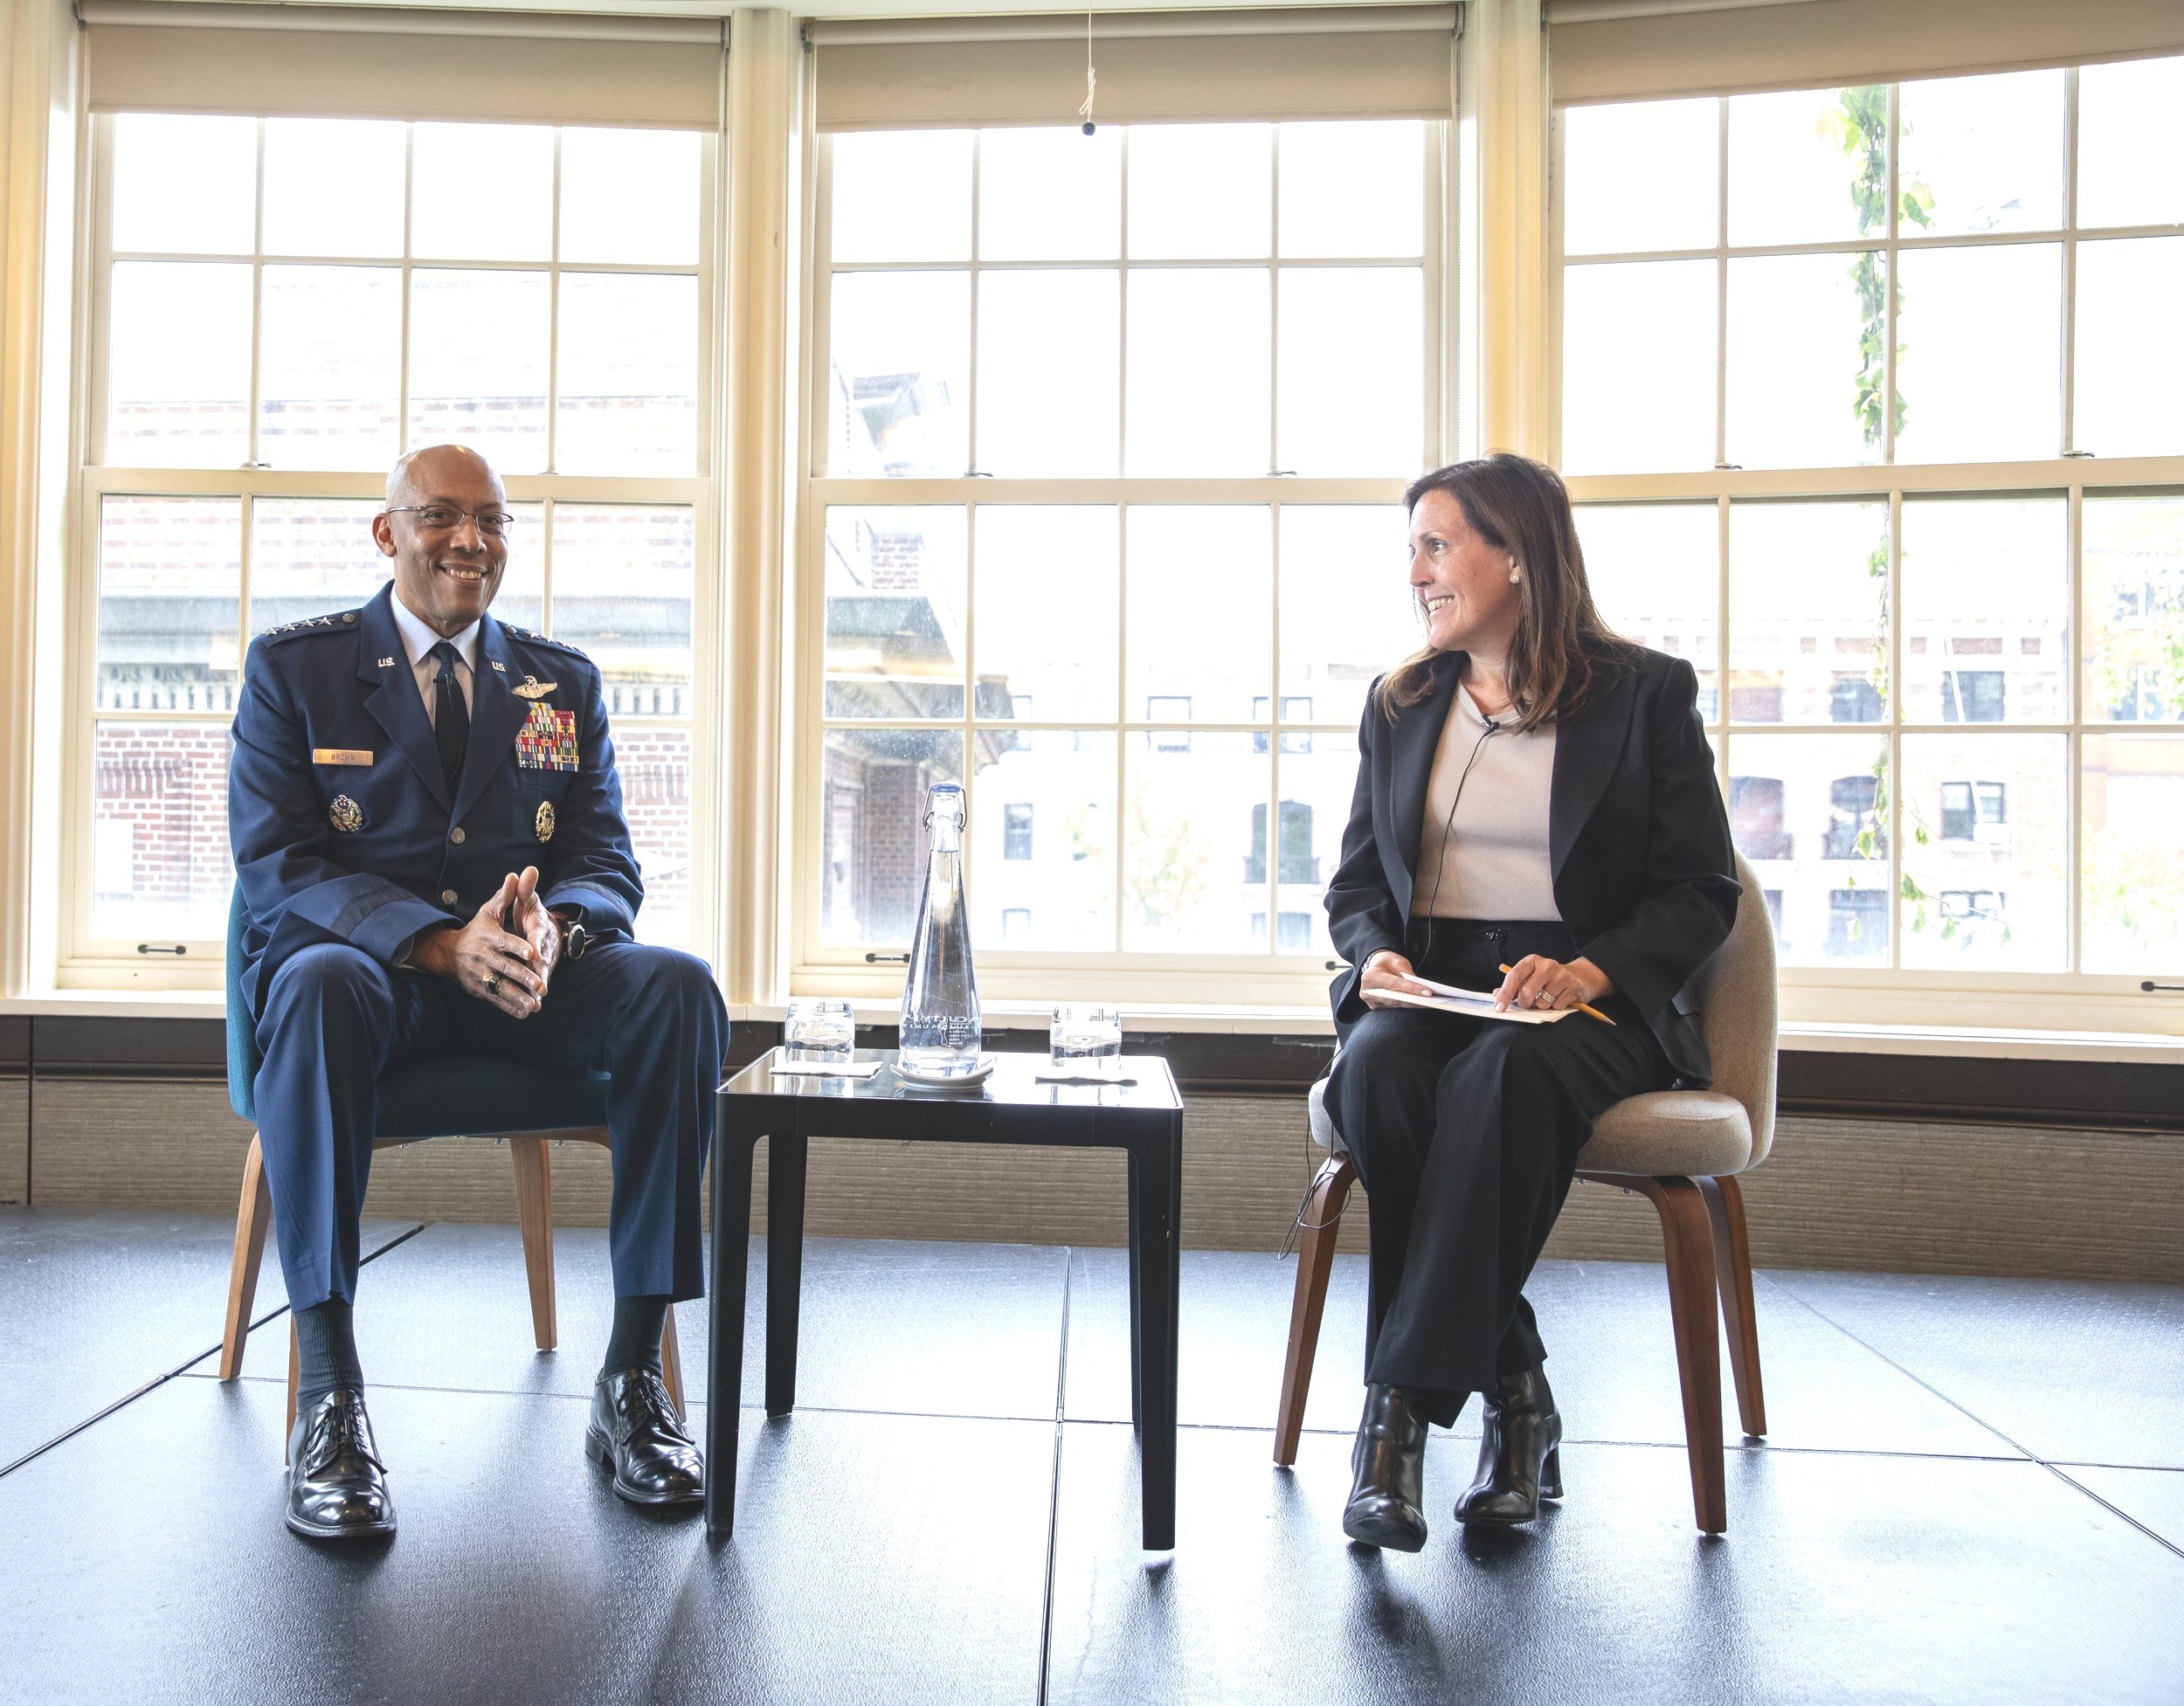 Gen. Charles Q. Brown, Jr. and Dr. N. W. Collins engage in a leadership conversation